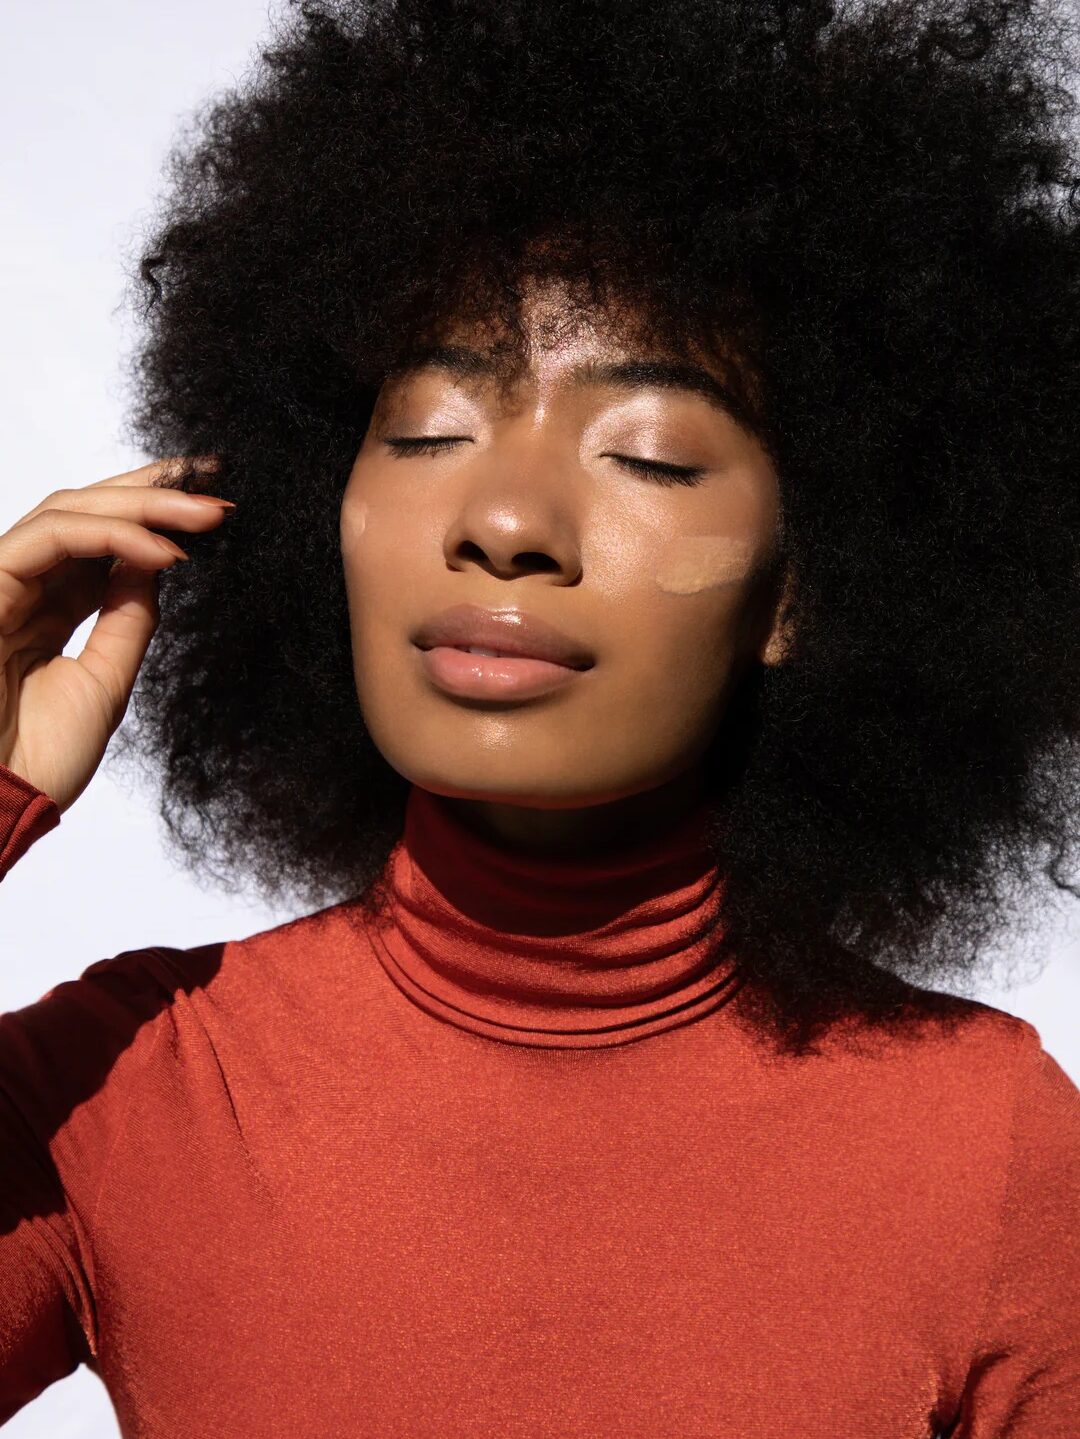 A Black model with natural hair closes her eyes and models sunscreen swatched on her cheeks